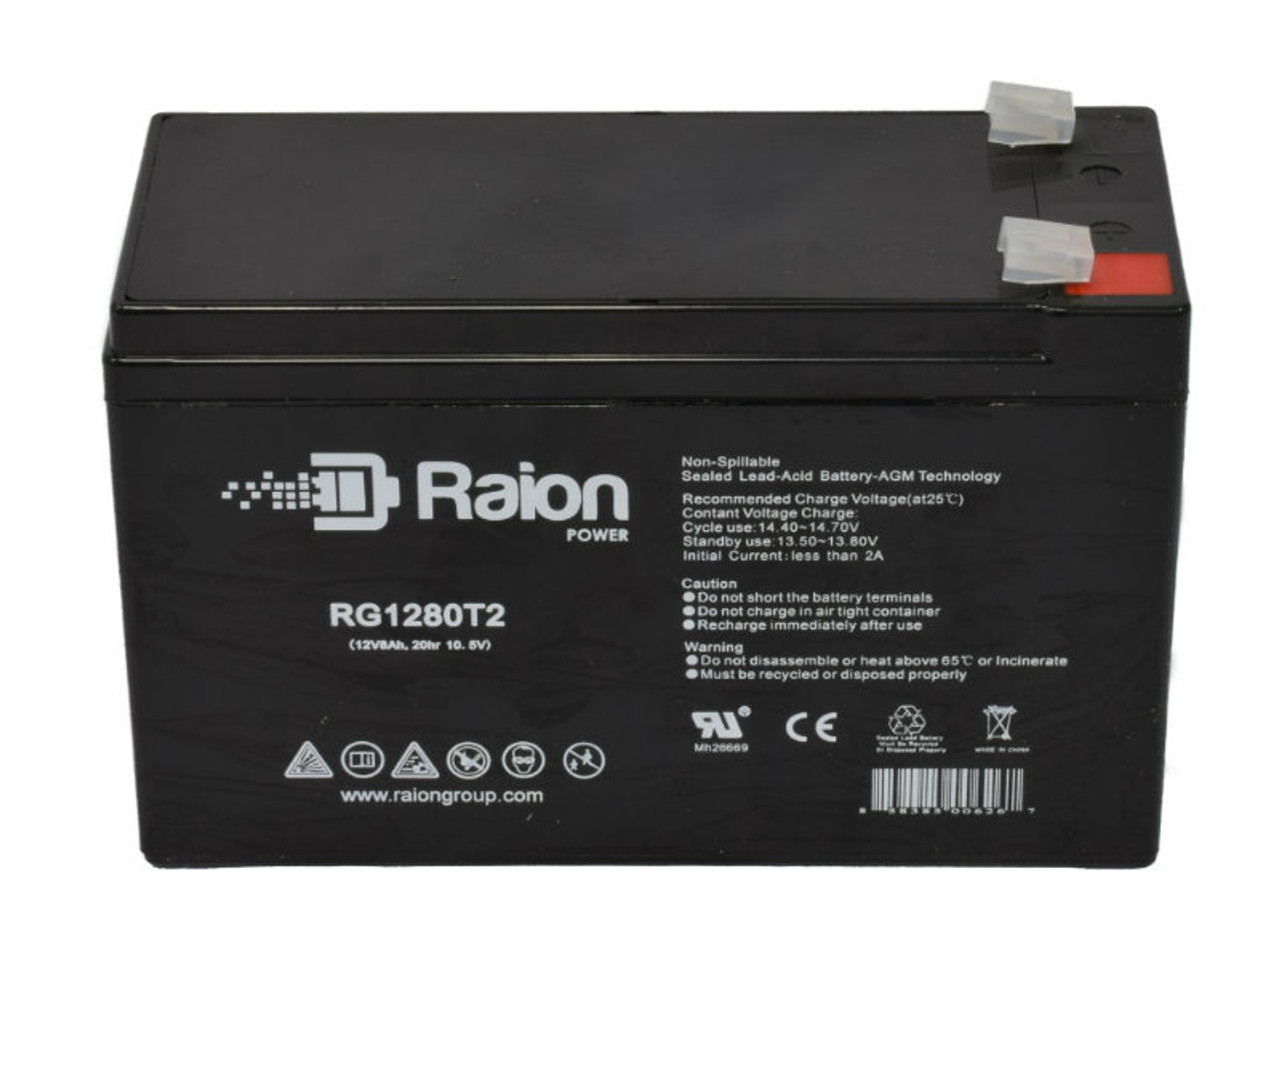 Raion Power Replacement 12V 8Ah Battery for Life Science LS5 Monitor - 1 Pack